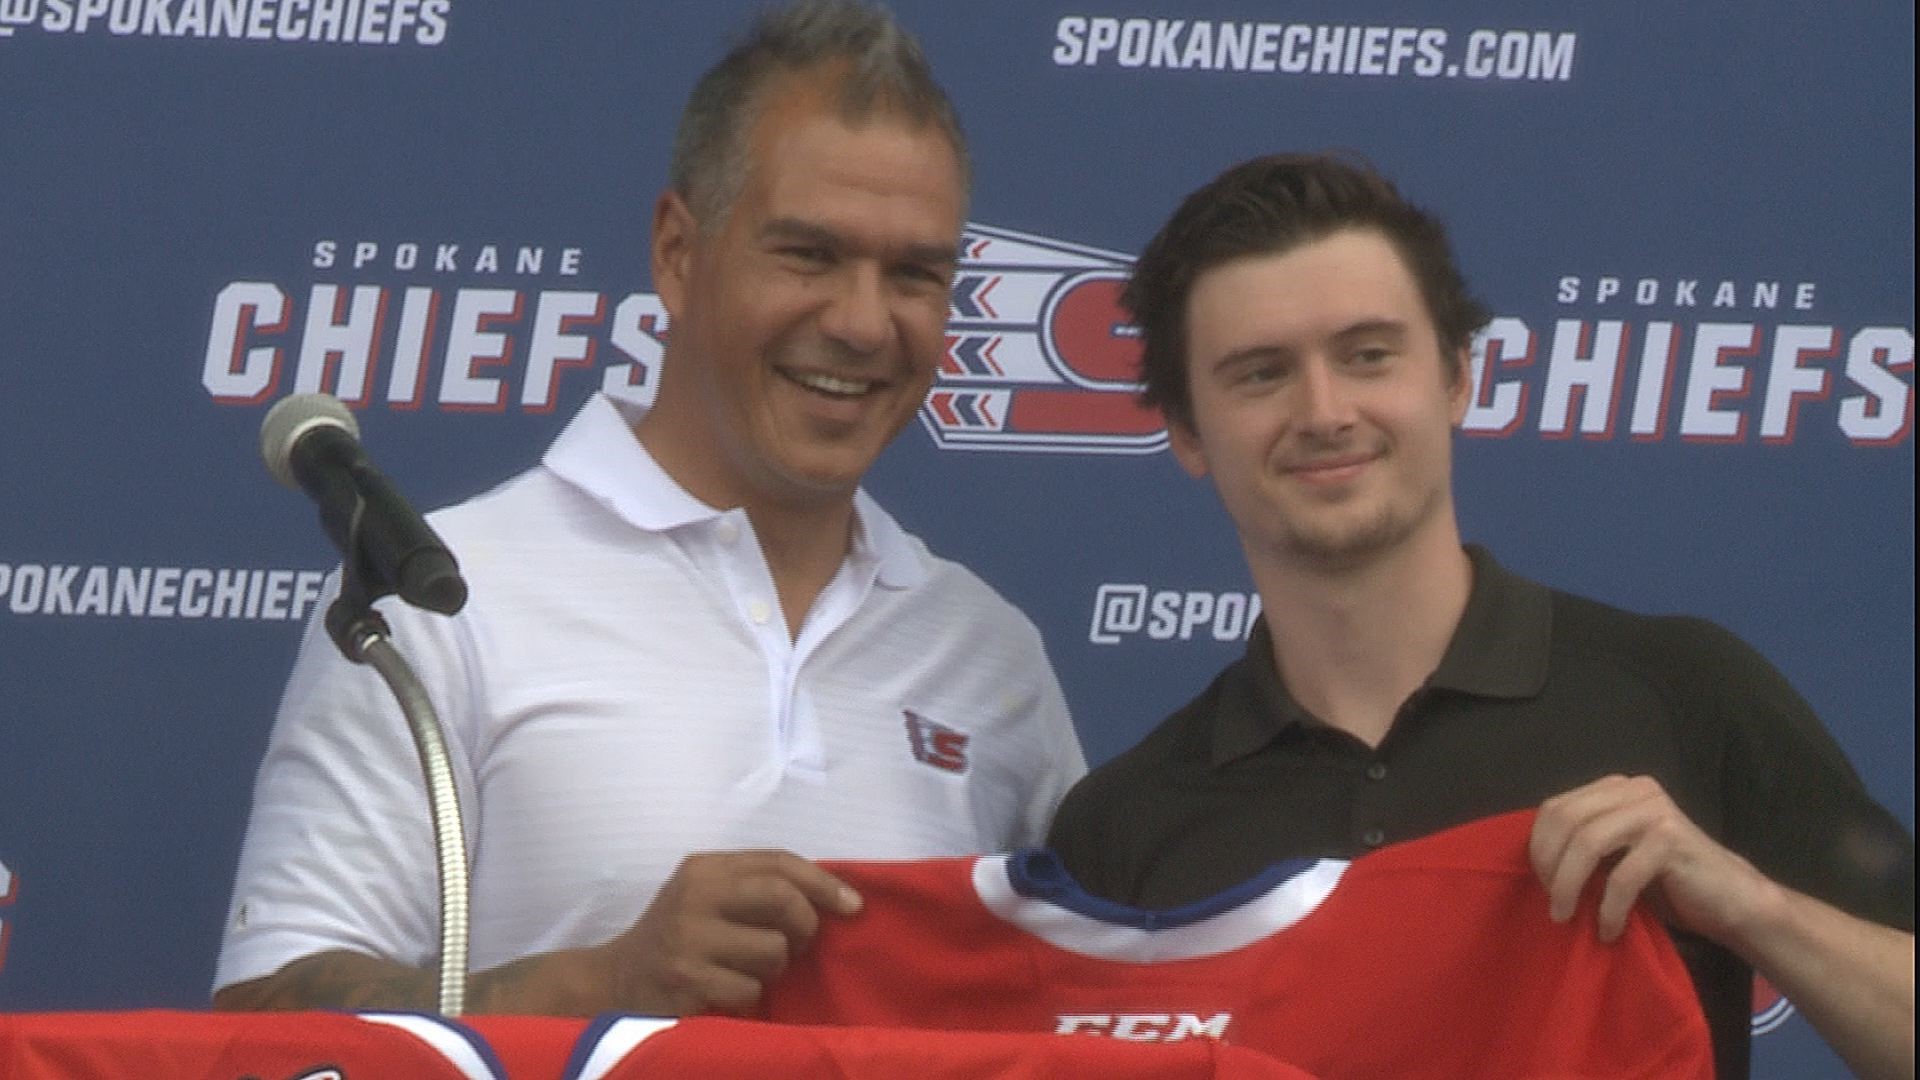 Former Chiefs legend Kailer Yamamoto presented Viveiros with a team jersey.